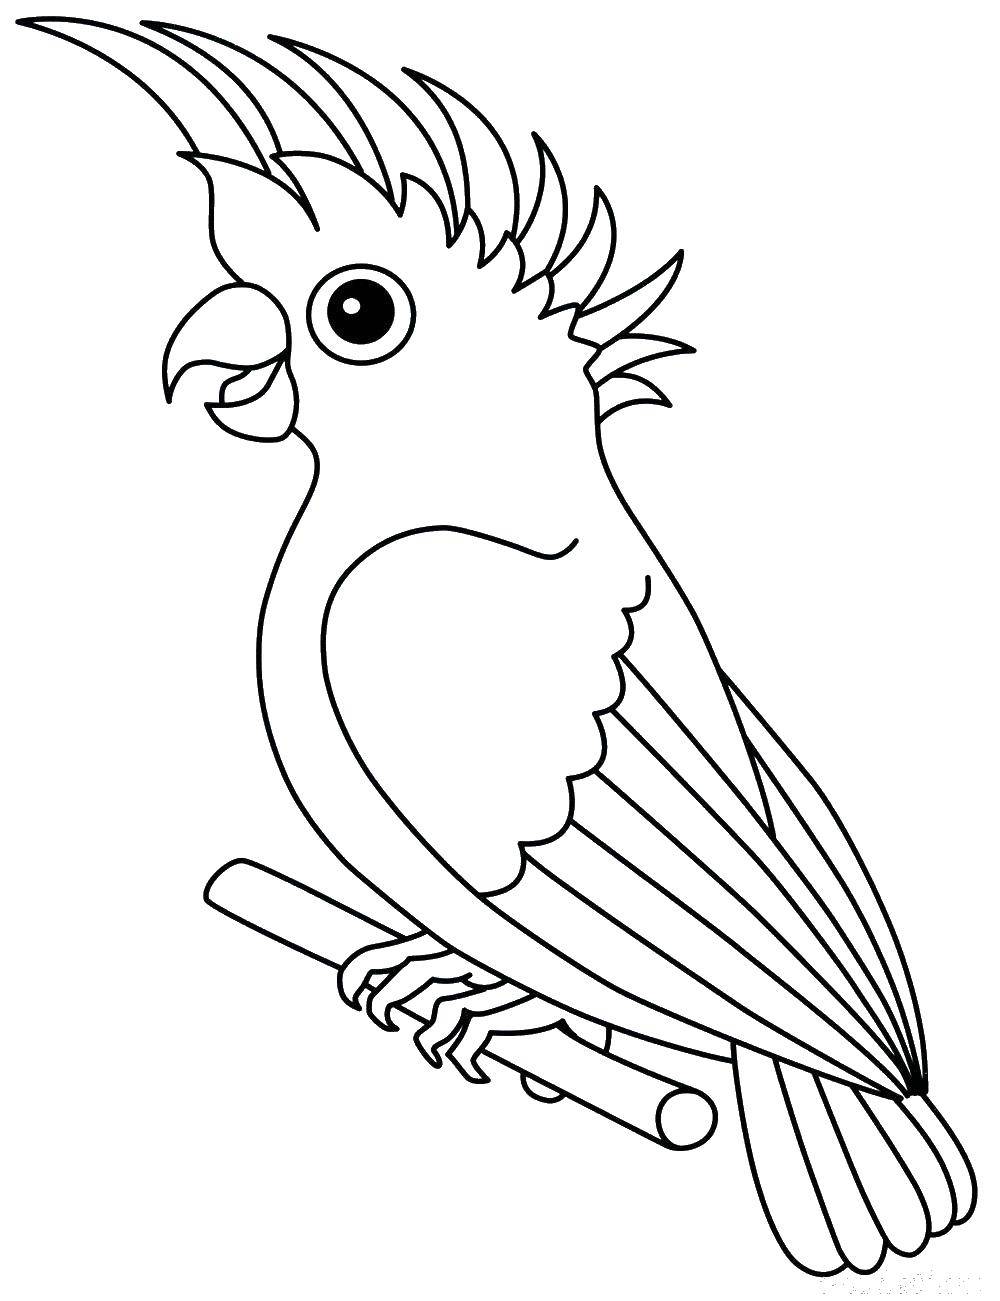 Coloring Parrot sitting on a branch. Category coloring pages parrot. Tags:  parrot, branch, bird, eyes.